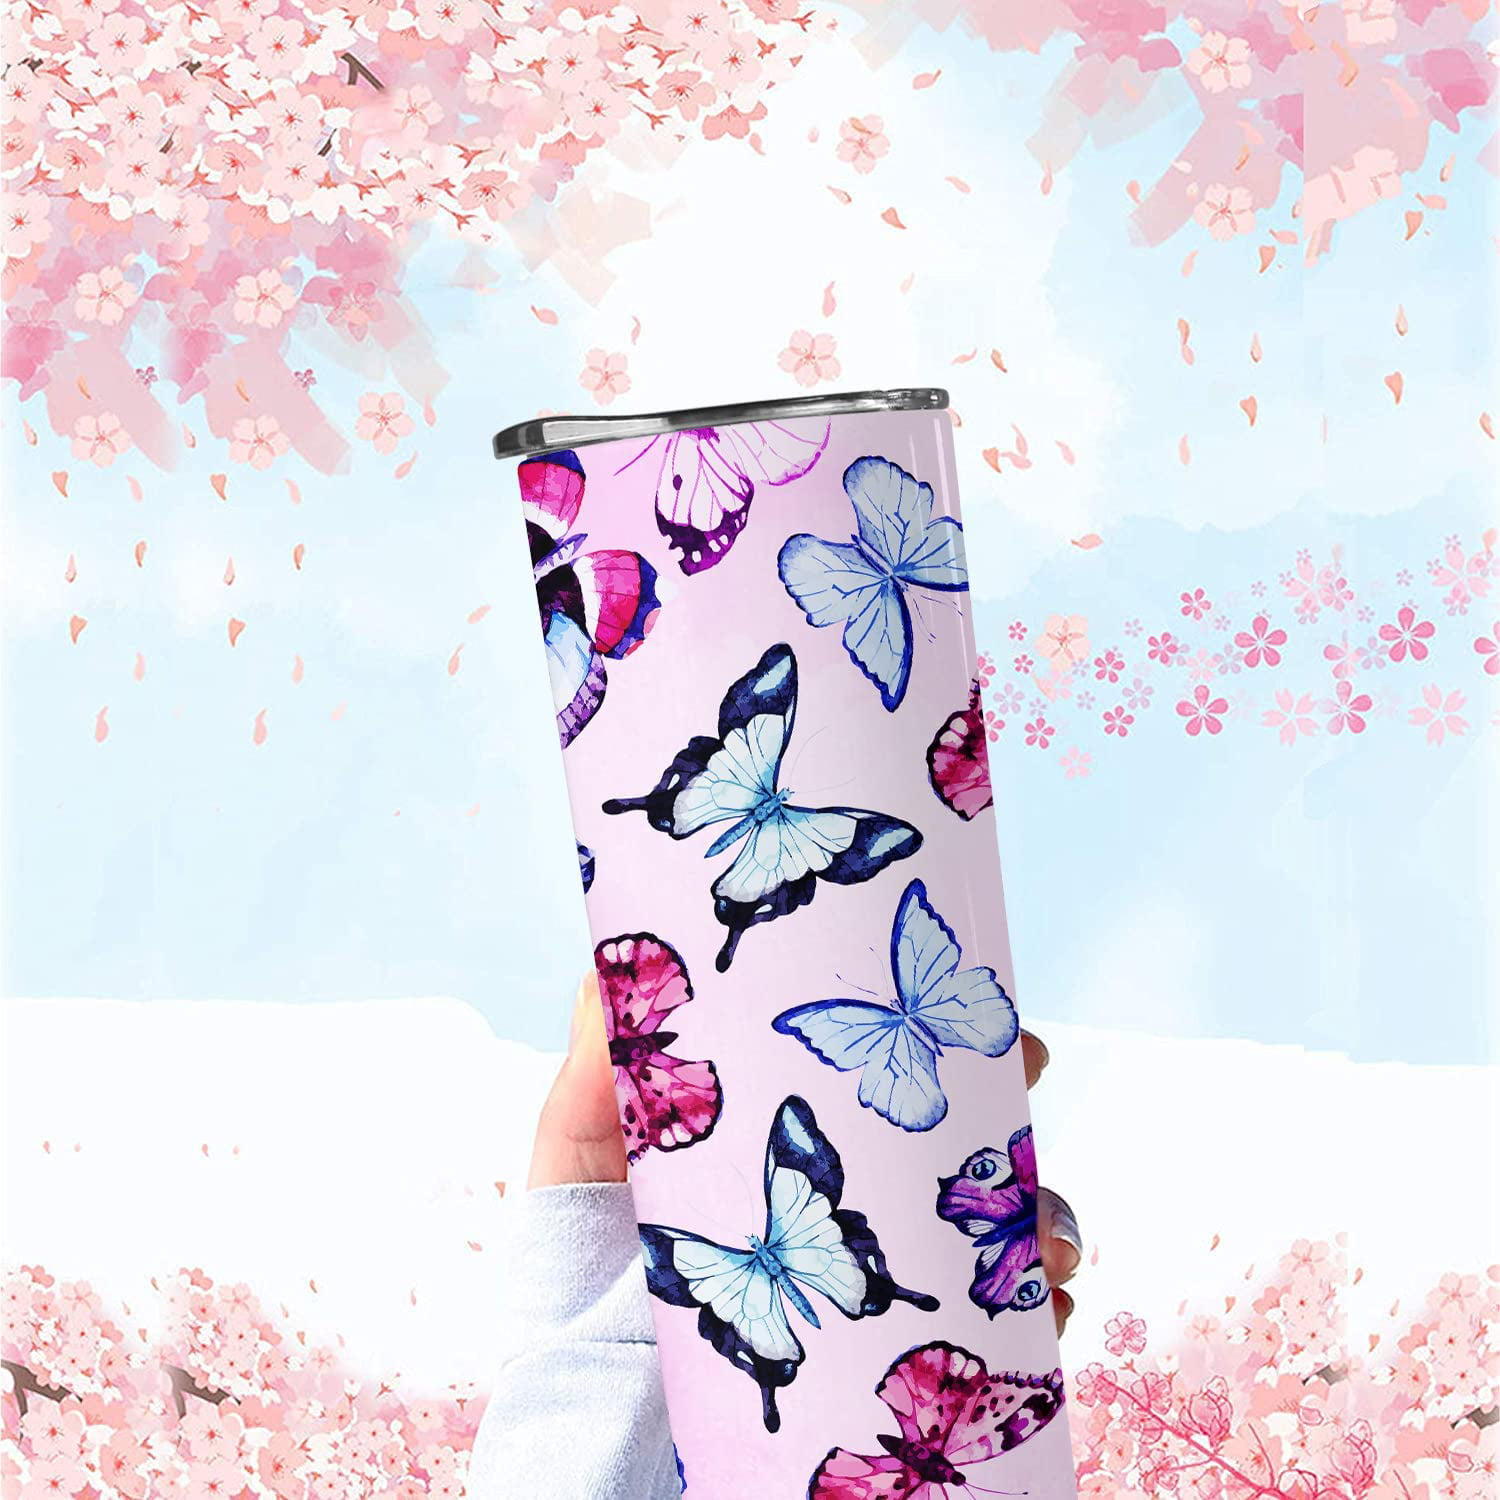 Butterflies 20oz Skinny tumbler with straw Printed With Permanent Ink. Add  name